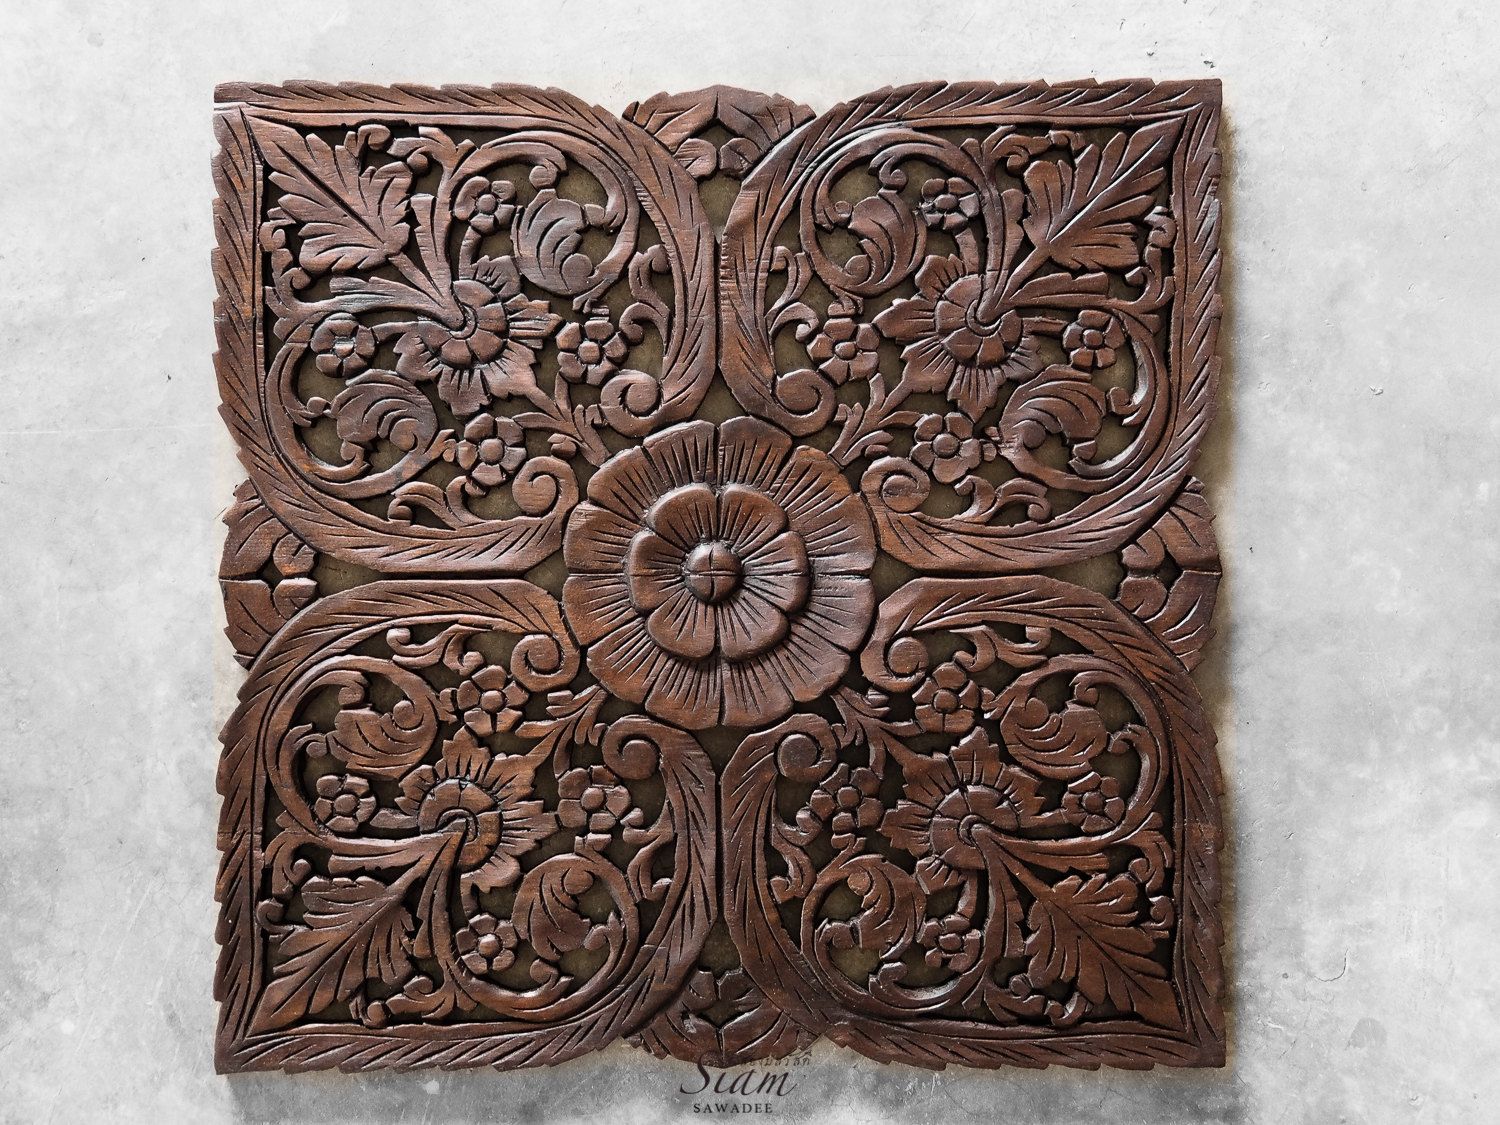 Thai Oriental Lotus Carved Wood Wall Art Decor Within Recent Landscape Wood Wall Art (View 1 of 20)